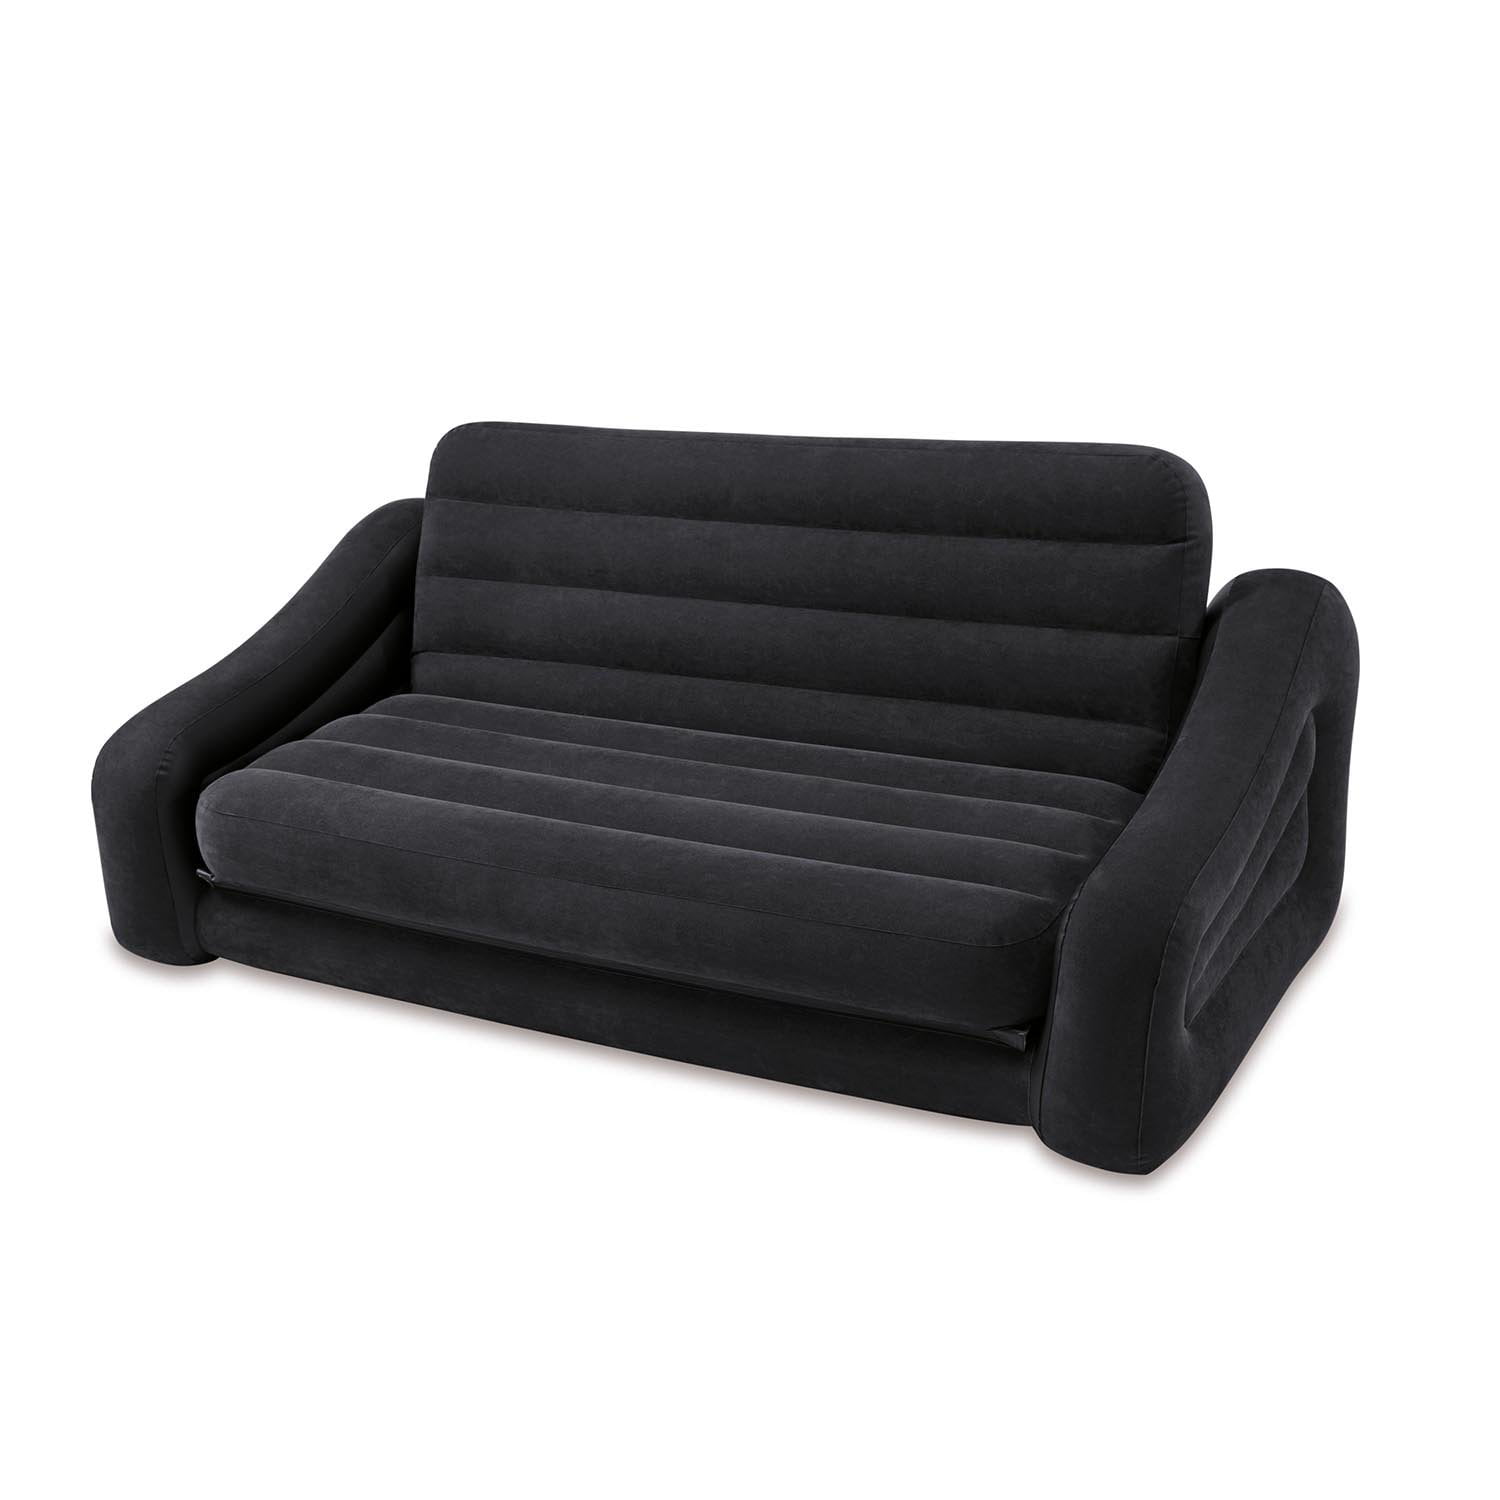 Details about   Intex PULL-OUT SOFA adul Age 